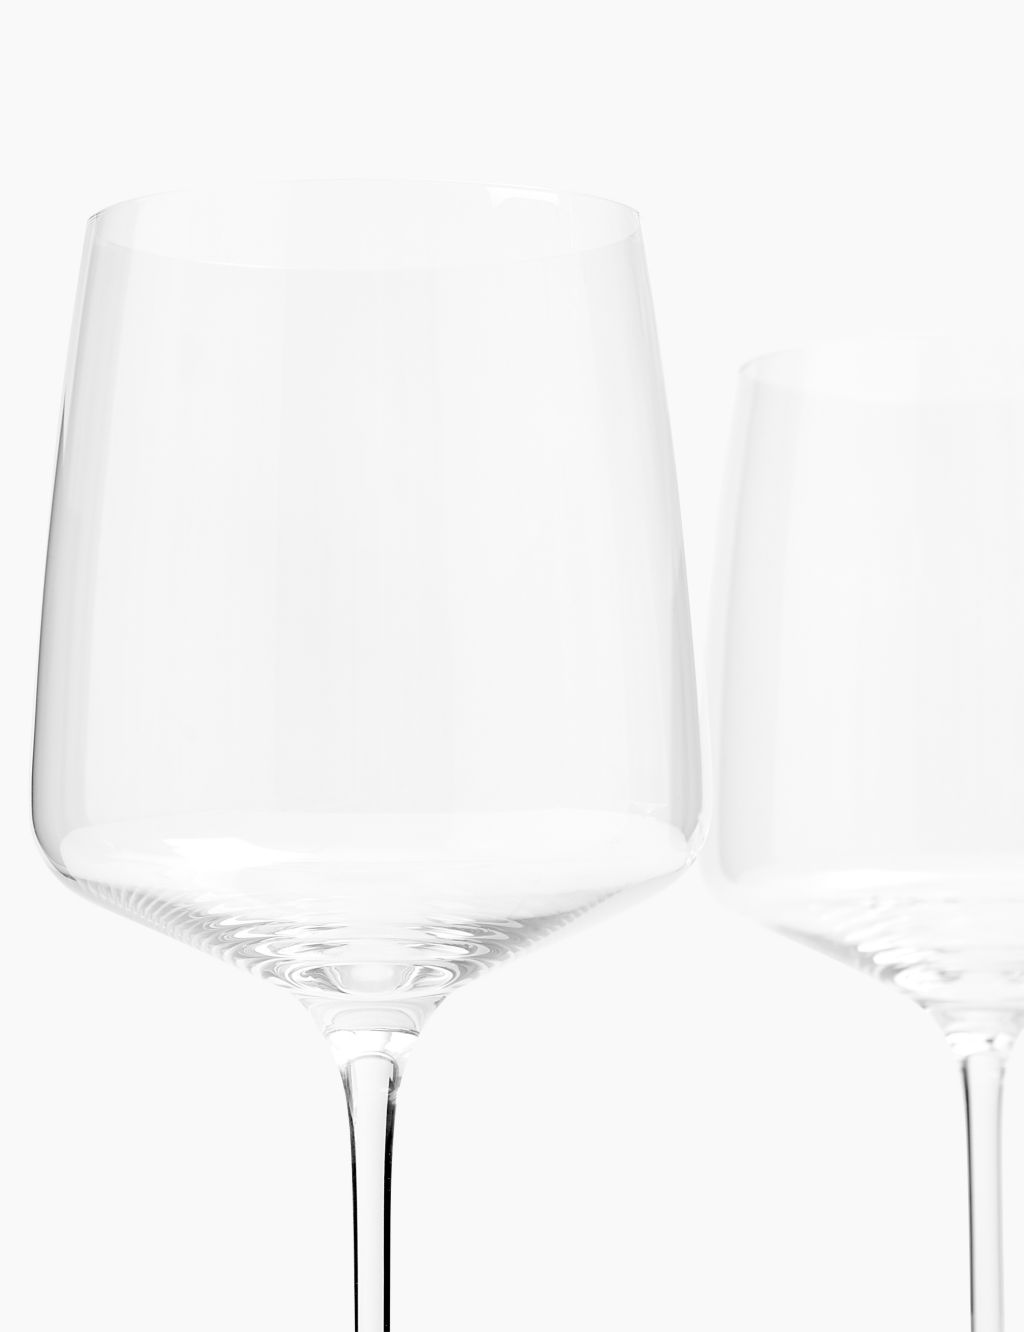 Metropolitan Red Wine Glass, Set of 4 – Be Home